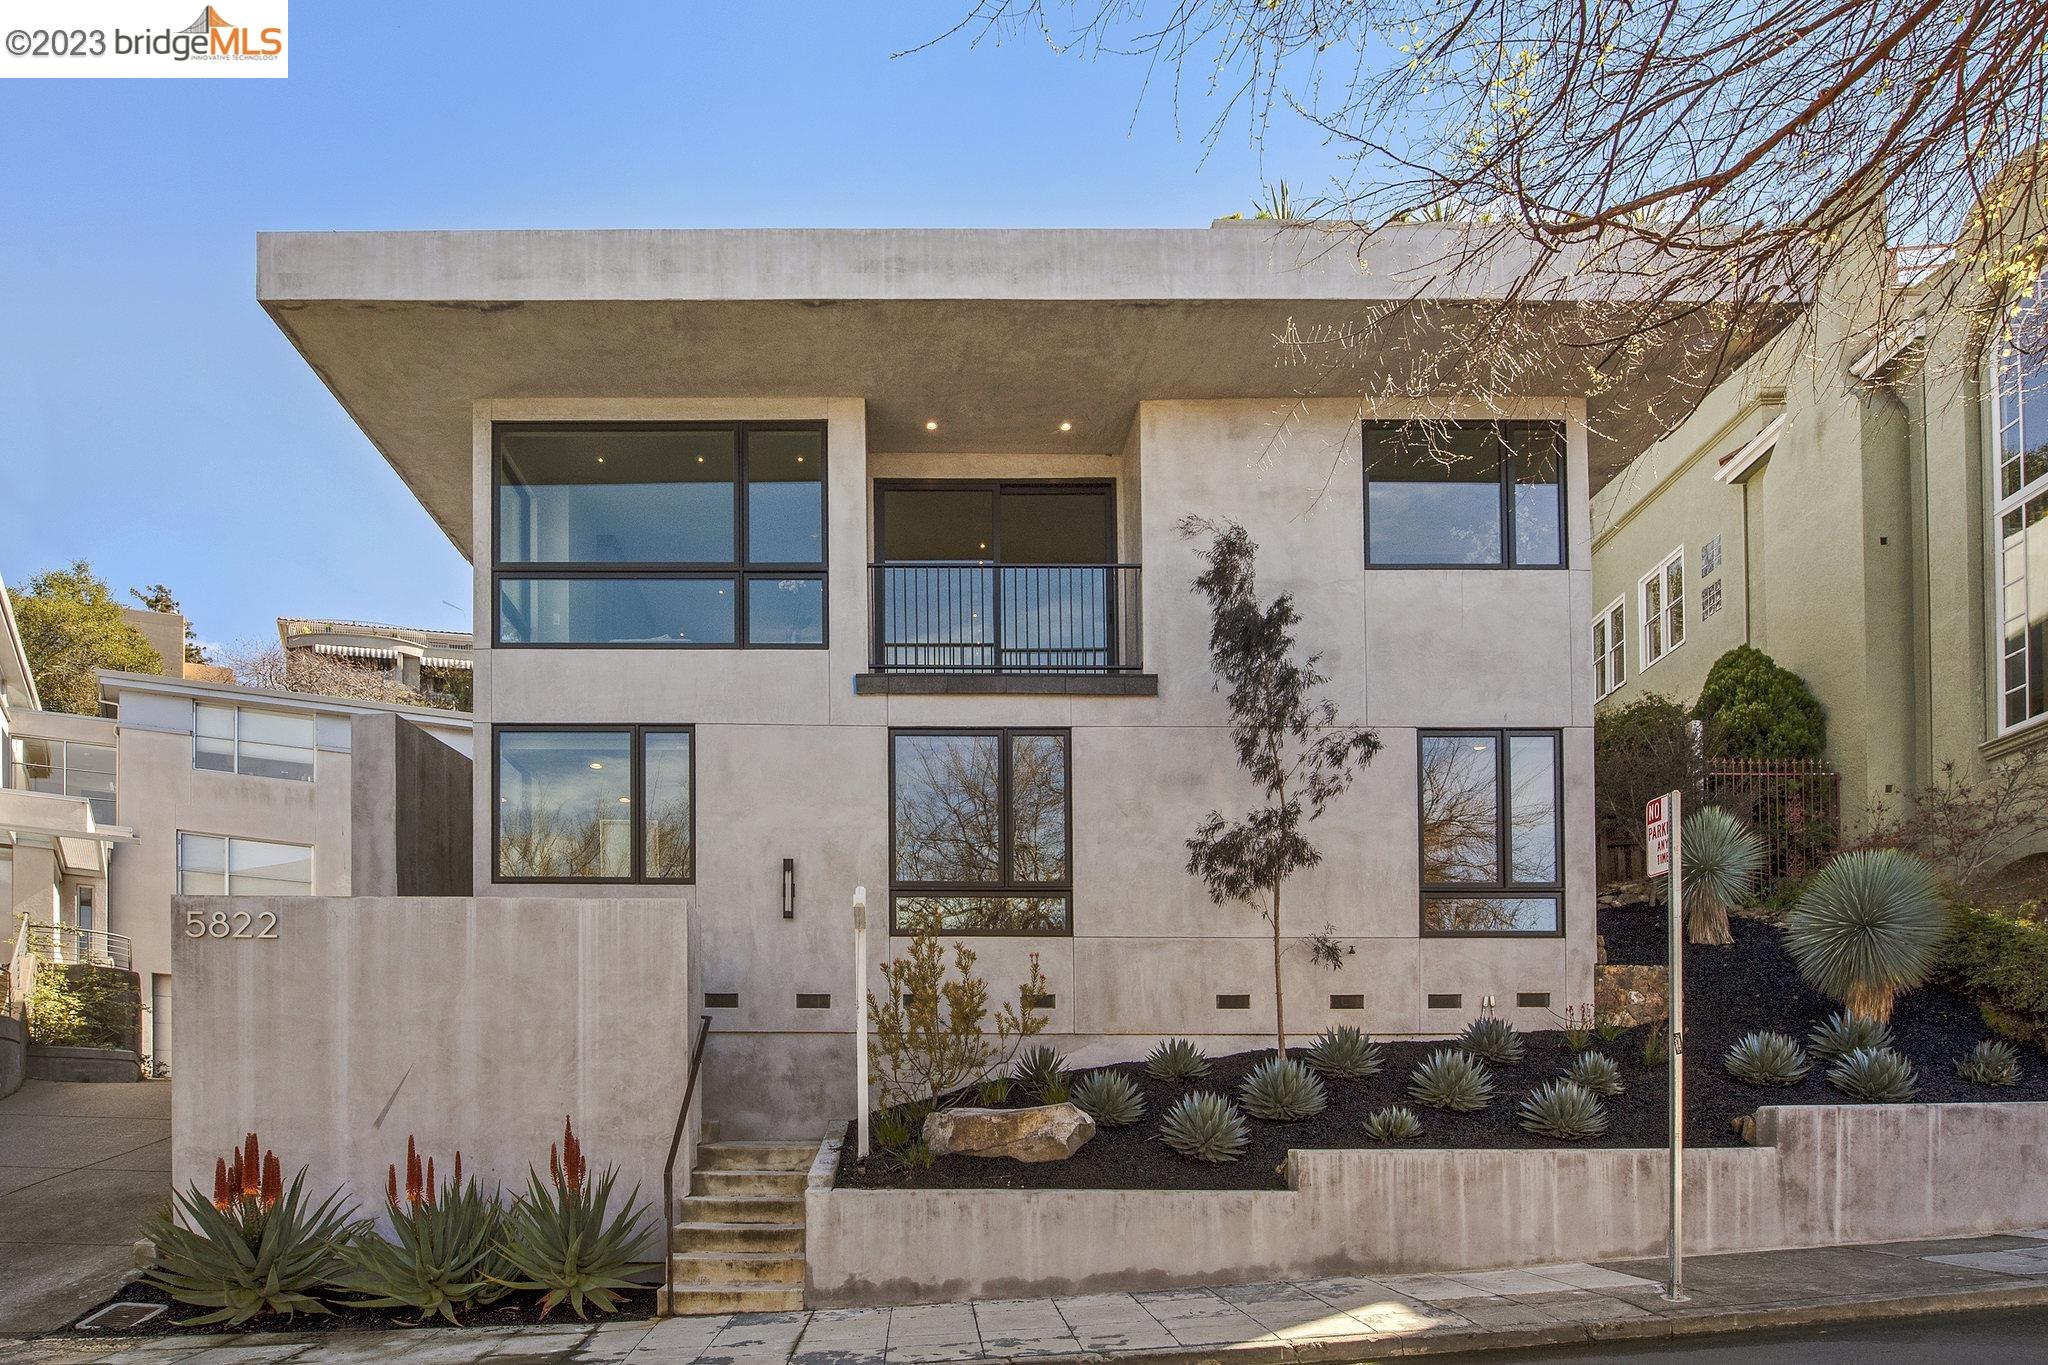 This 2018 Contemporary is a unique confluence of modern luxury, comfort and style. A light-filled spacious open floor plan. Four plus bedrooms, 3 1/2 baths and rooftop deck offering a front room seat to unobstructed views of San Francisco Bay, skyline, Mount Tam and bridges. The main level open floor plan includes a modern chef's kitchen that features an oversized marble island, Thermador appliances, two dishwashers, and abundant storage and walk-in pantry. The courtyard compliments the space for entertaining while adding natural light.  The powder room completes this level.  A large family room leading out to the rooftop deck welcomes you to the upper level.  The primary en suite offers a spa inspired bath and generous walk-in closet. Two additional beds and add’l bath, plus laundry room complete that level. The lower-level retreat with one large bedroom, office, full bath, and a media room with a separate entrance this space is perfect for your guests or au pair. Just a few blocks from Oakland's best shops and restaurants, highways, buses, and Rockridge BART.